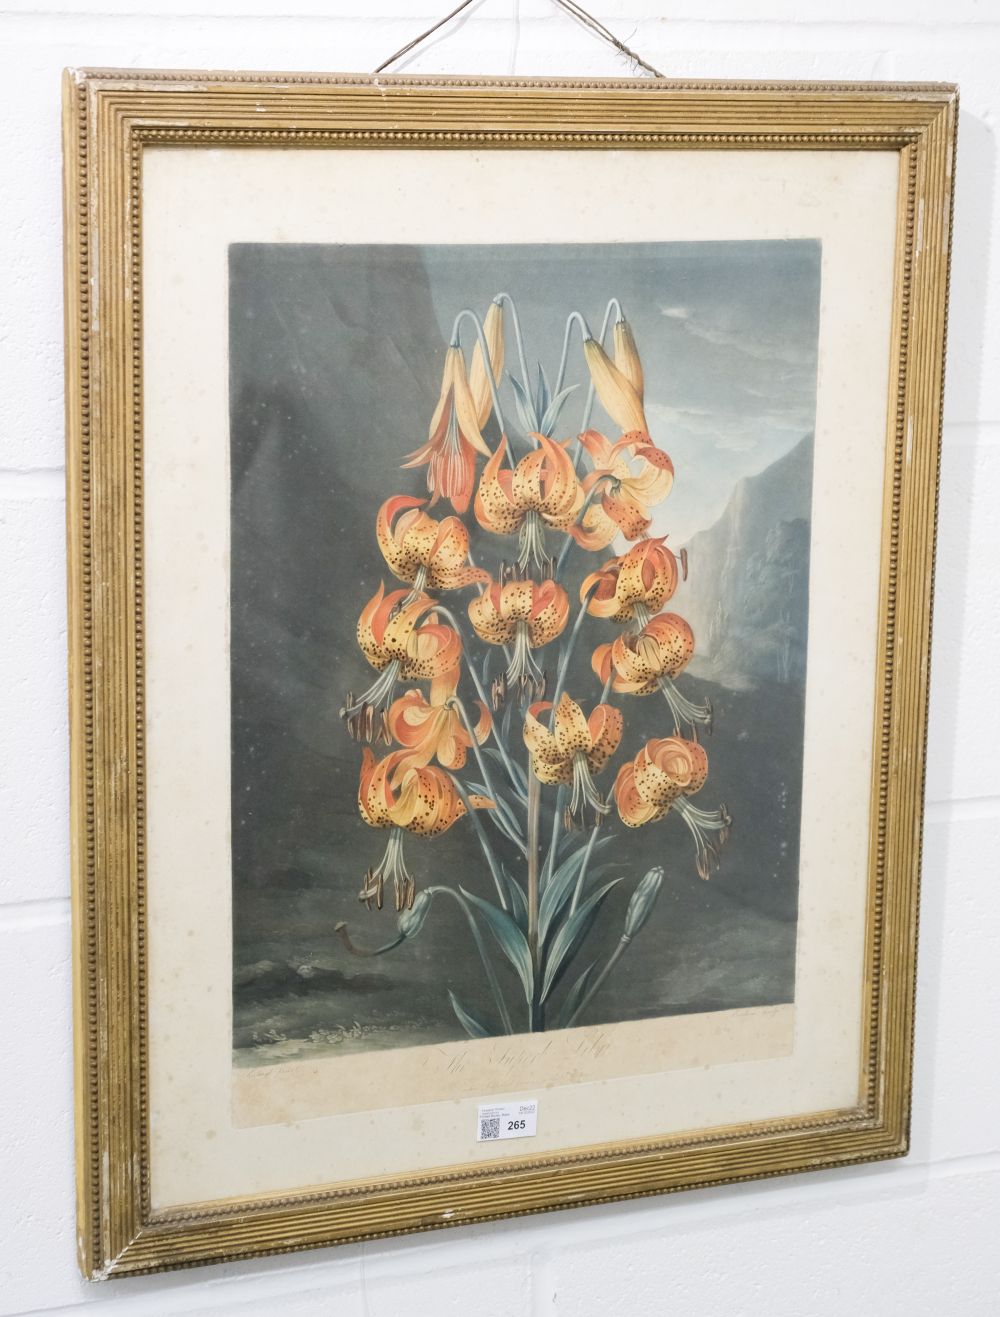 Thornton (Dr Robert). The Superb Lily, June 1st. 1799 - Image 2 of 5